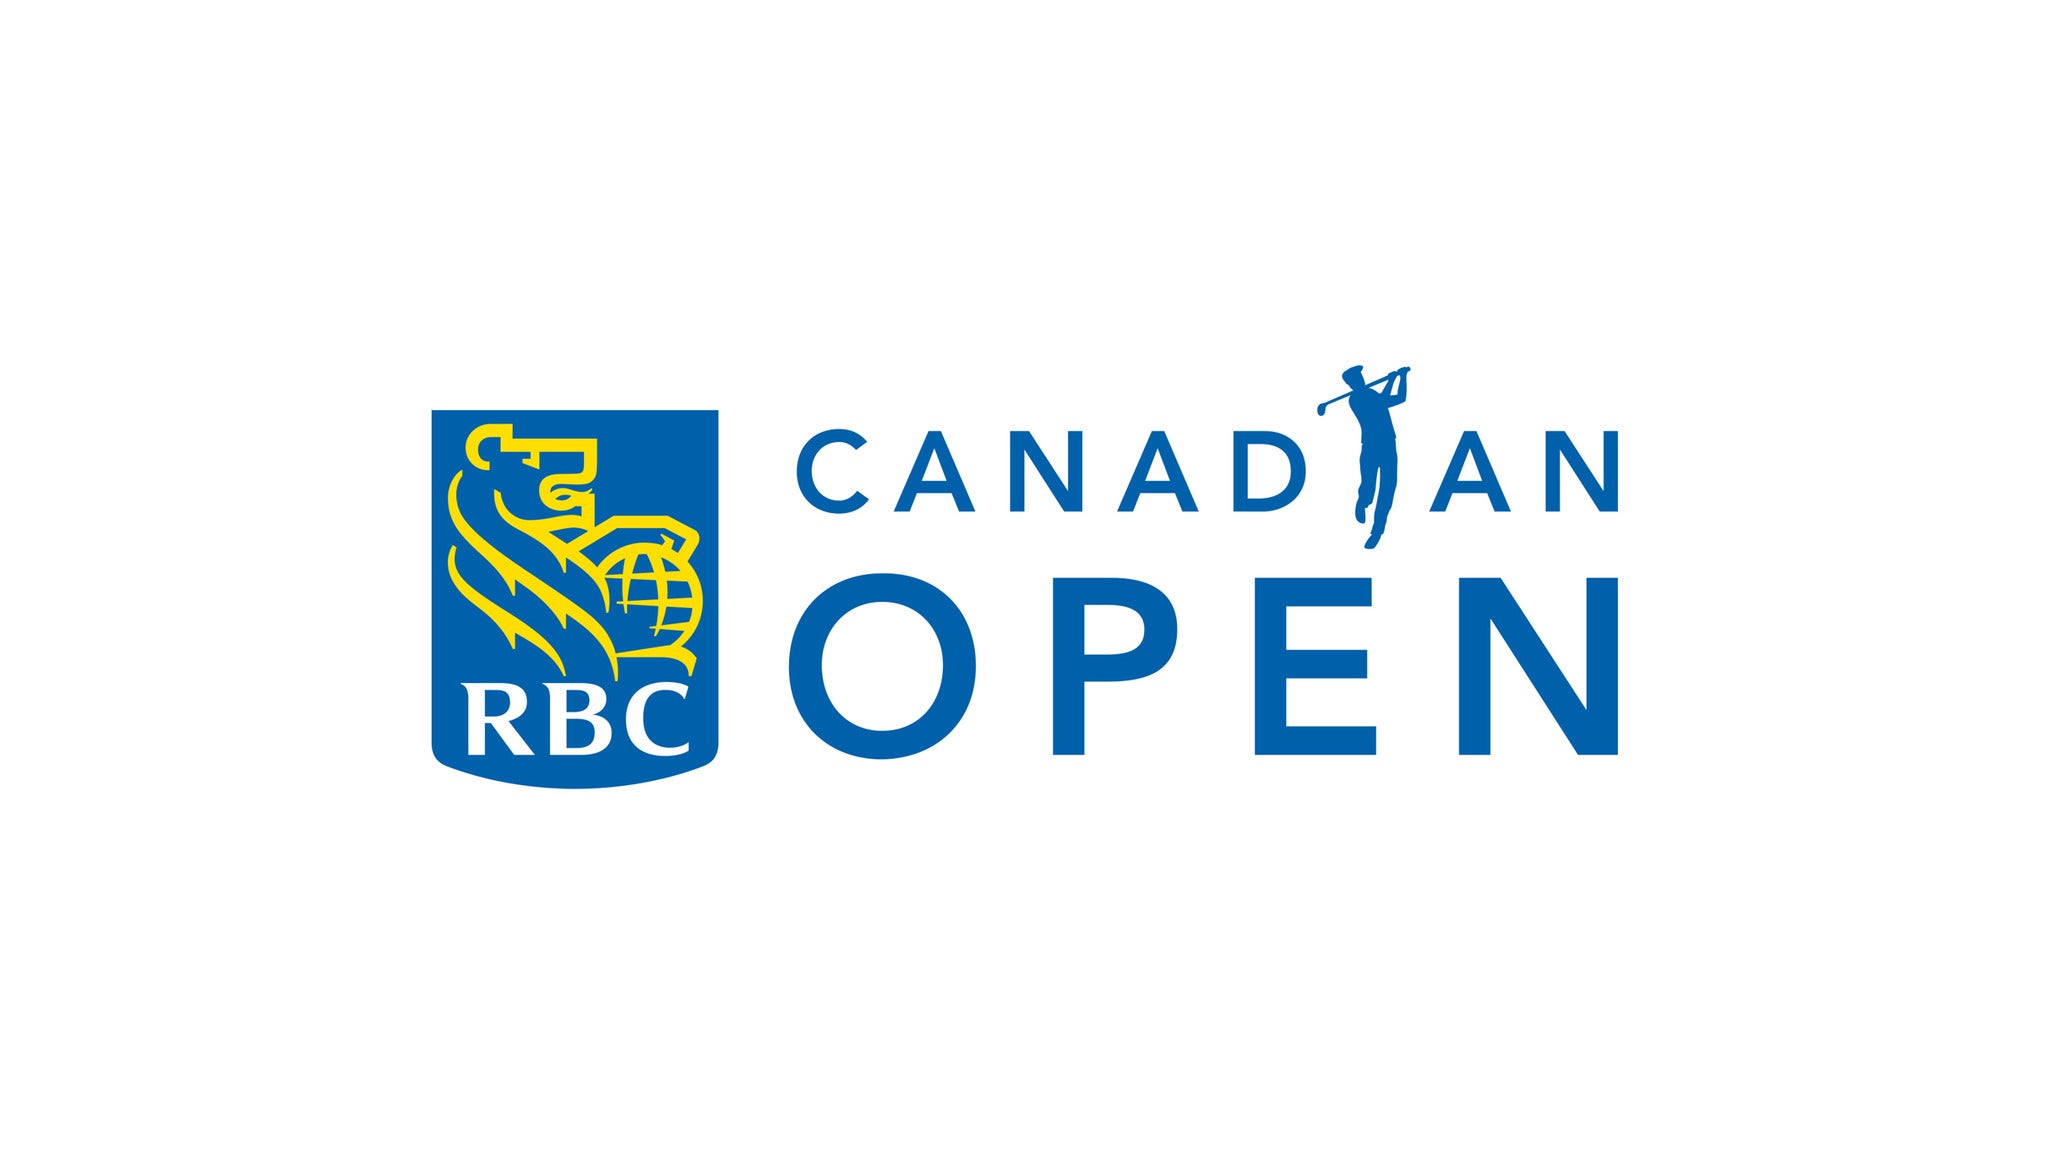 RBC Canadian Open - Sunday Admissions in Toronto promo photo for Golf Canada presale offer code